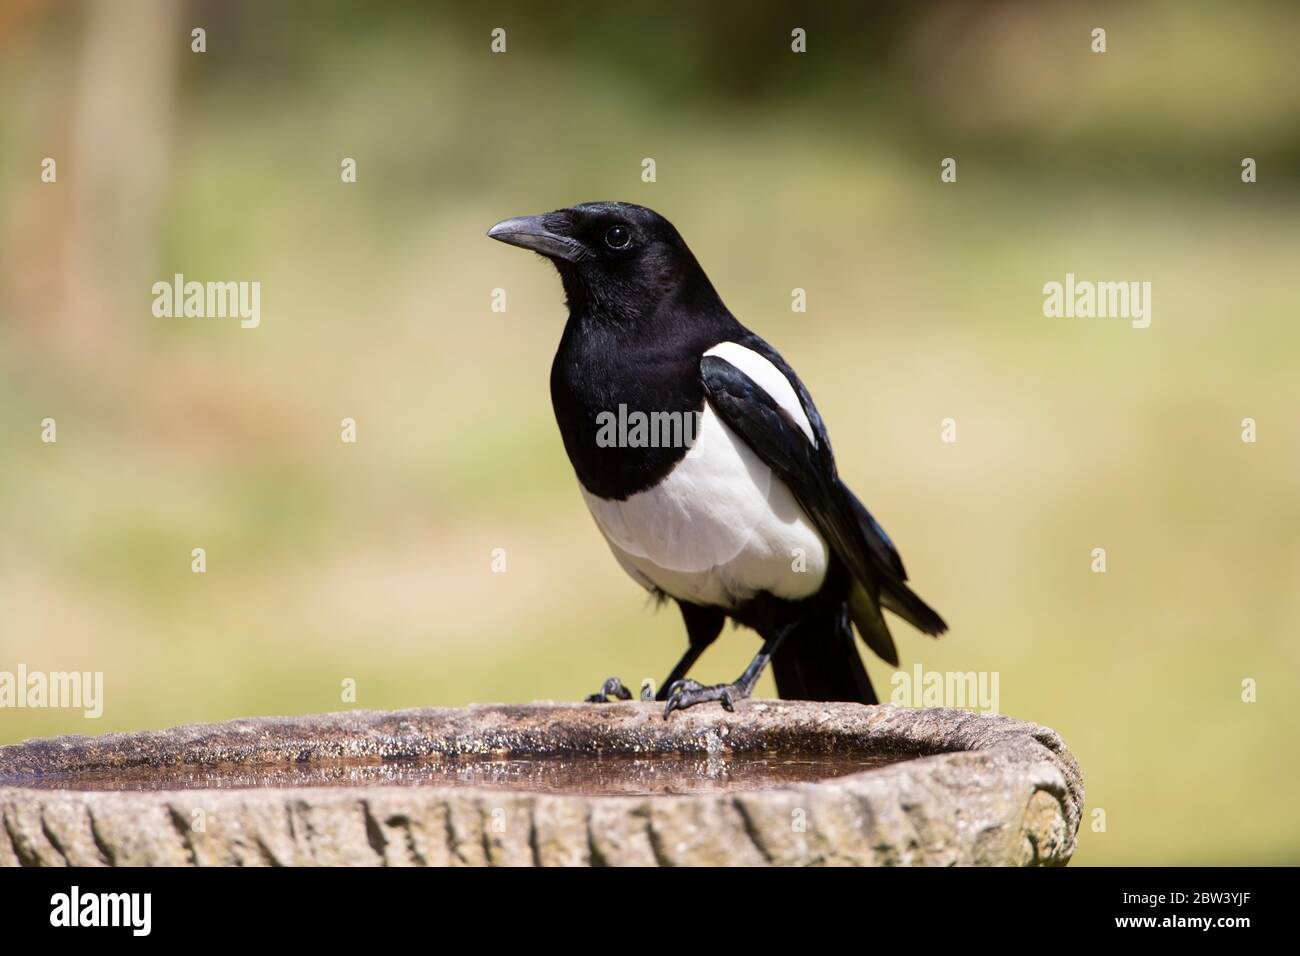 Common Magpie  Pica pica in close up perching on the rim of  a garden birdbath against a diffuse background Stock Photo